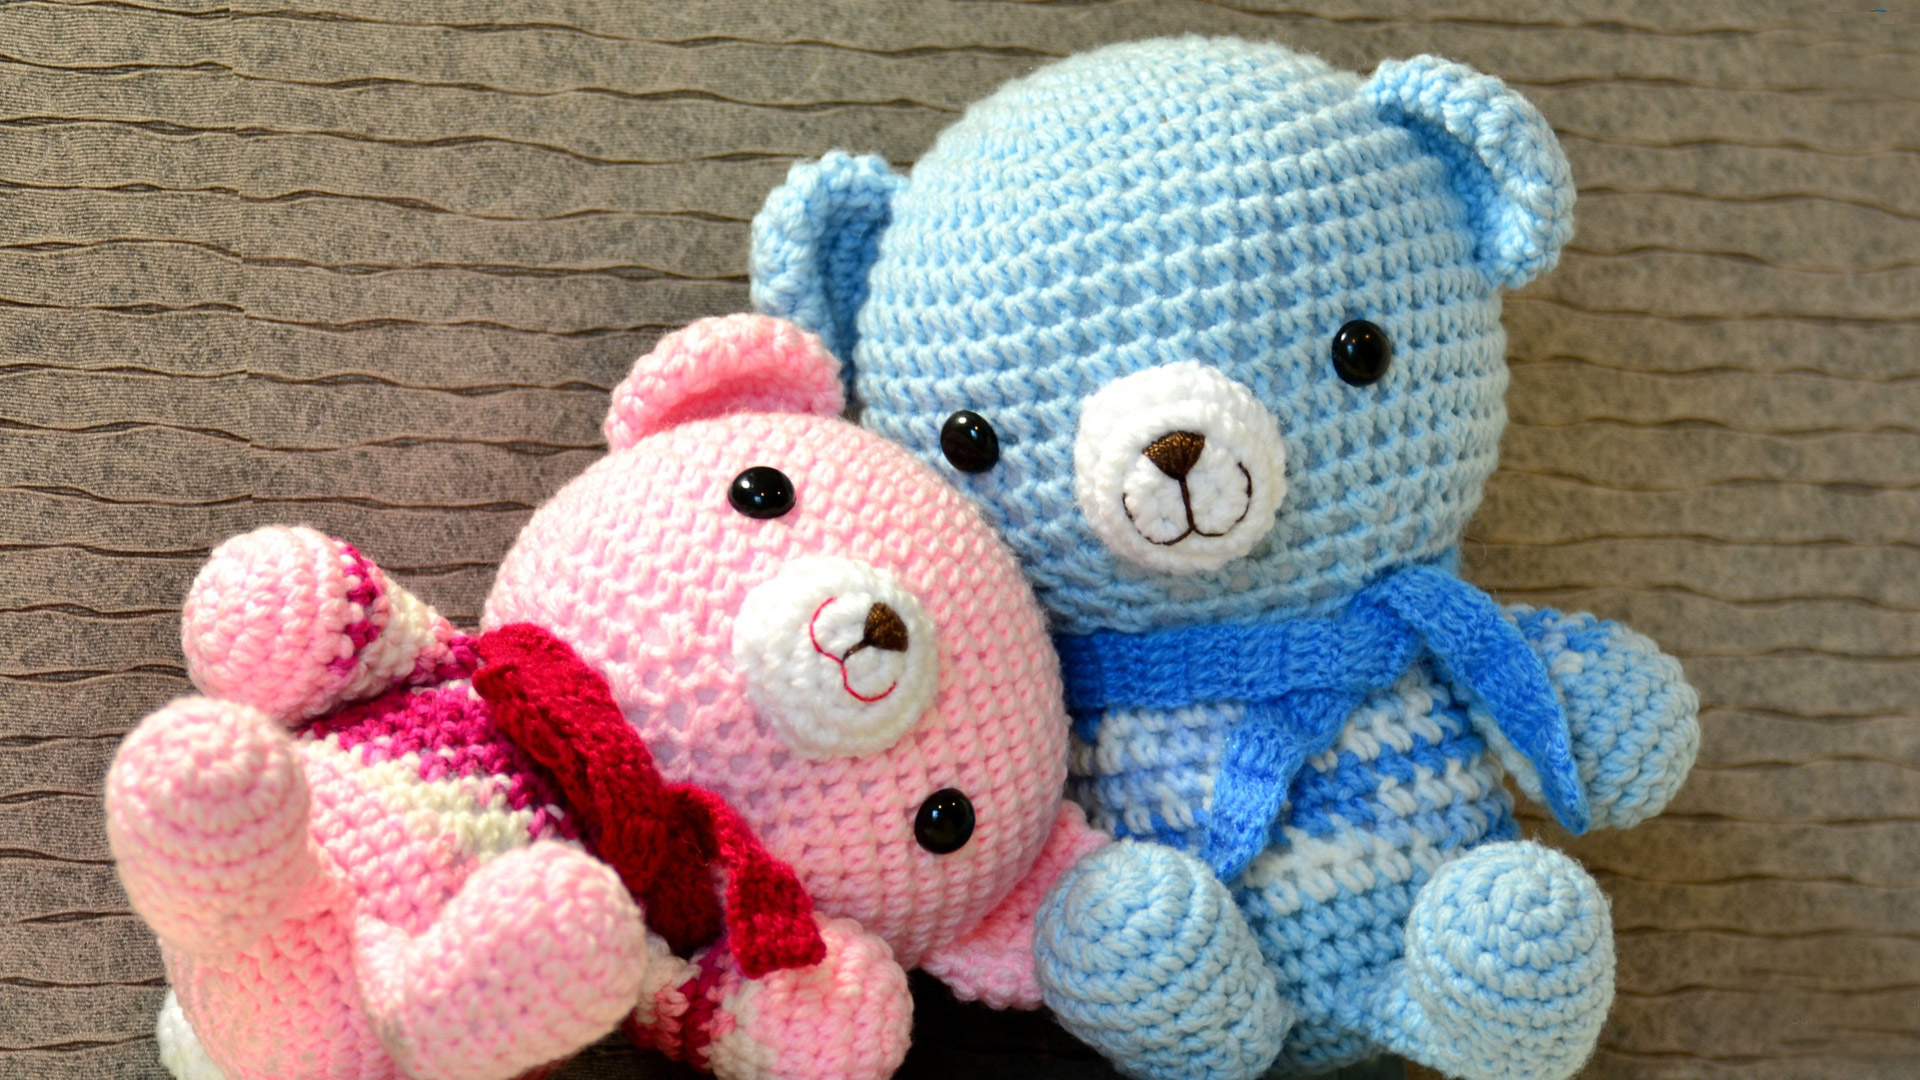 Teddy Bear Wallpapers Free Download Group - Blue And Pink Teddy - 1920x1080  Wallpaper 